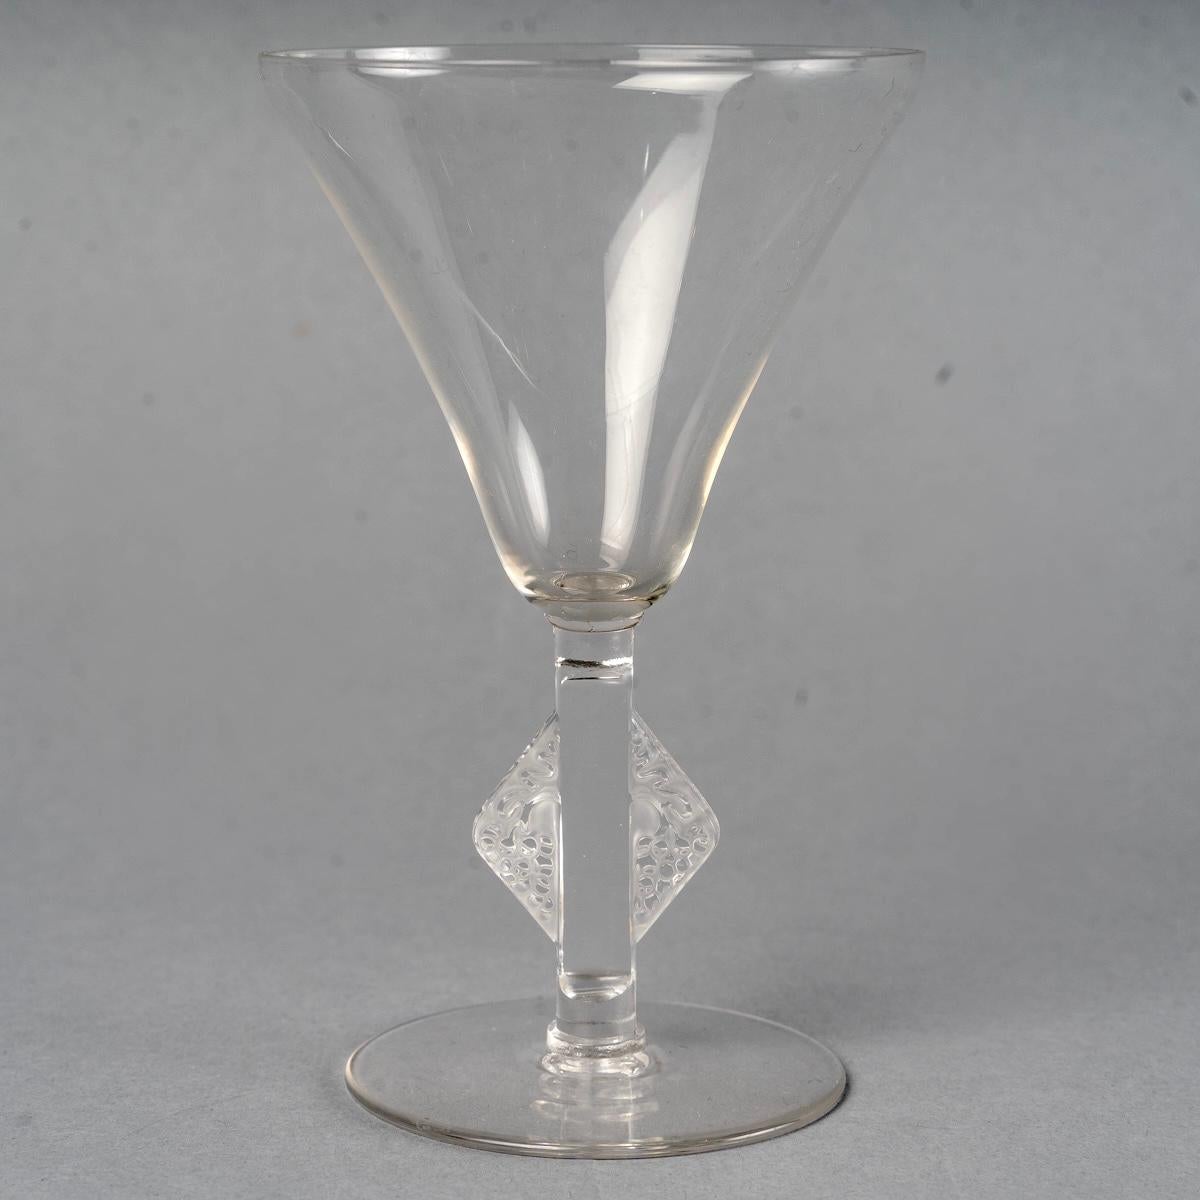 Early 20th Century 1924 René Lalique, Set of Tablewares Glasses Savergne Clear Glass, 34 Pieces For Sale